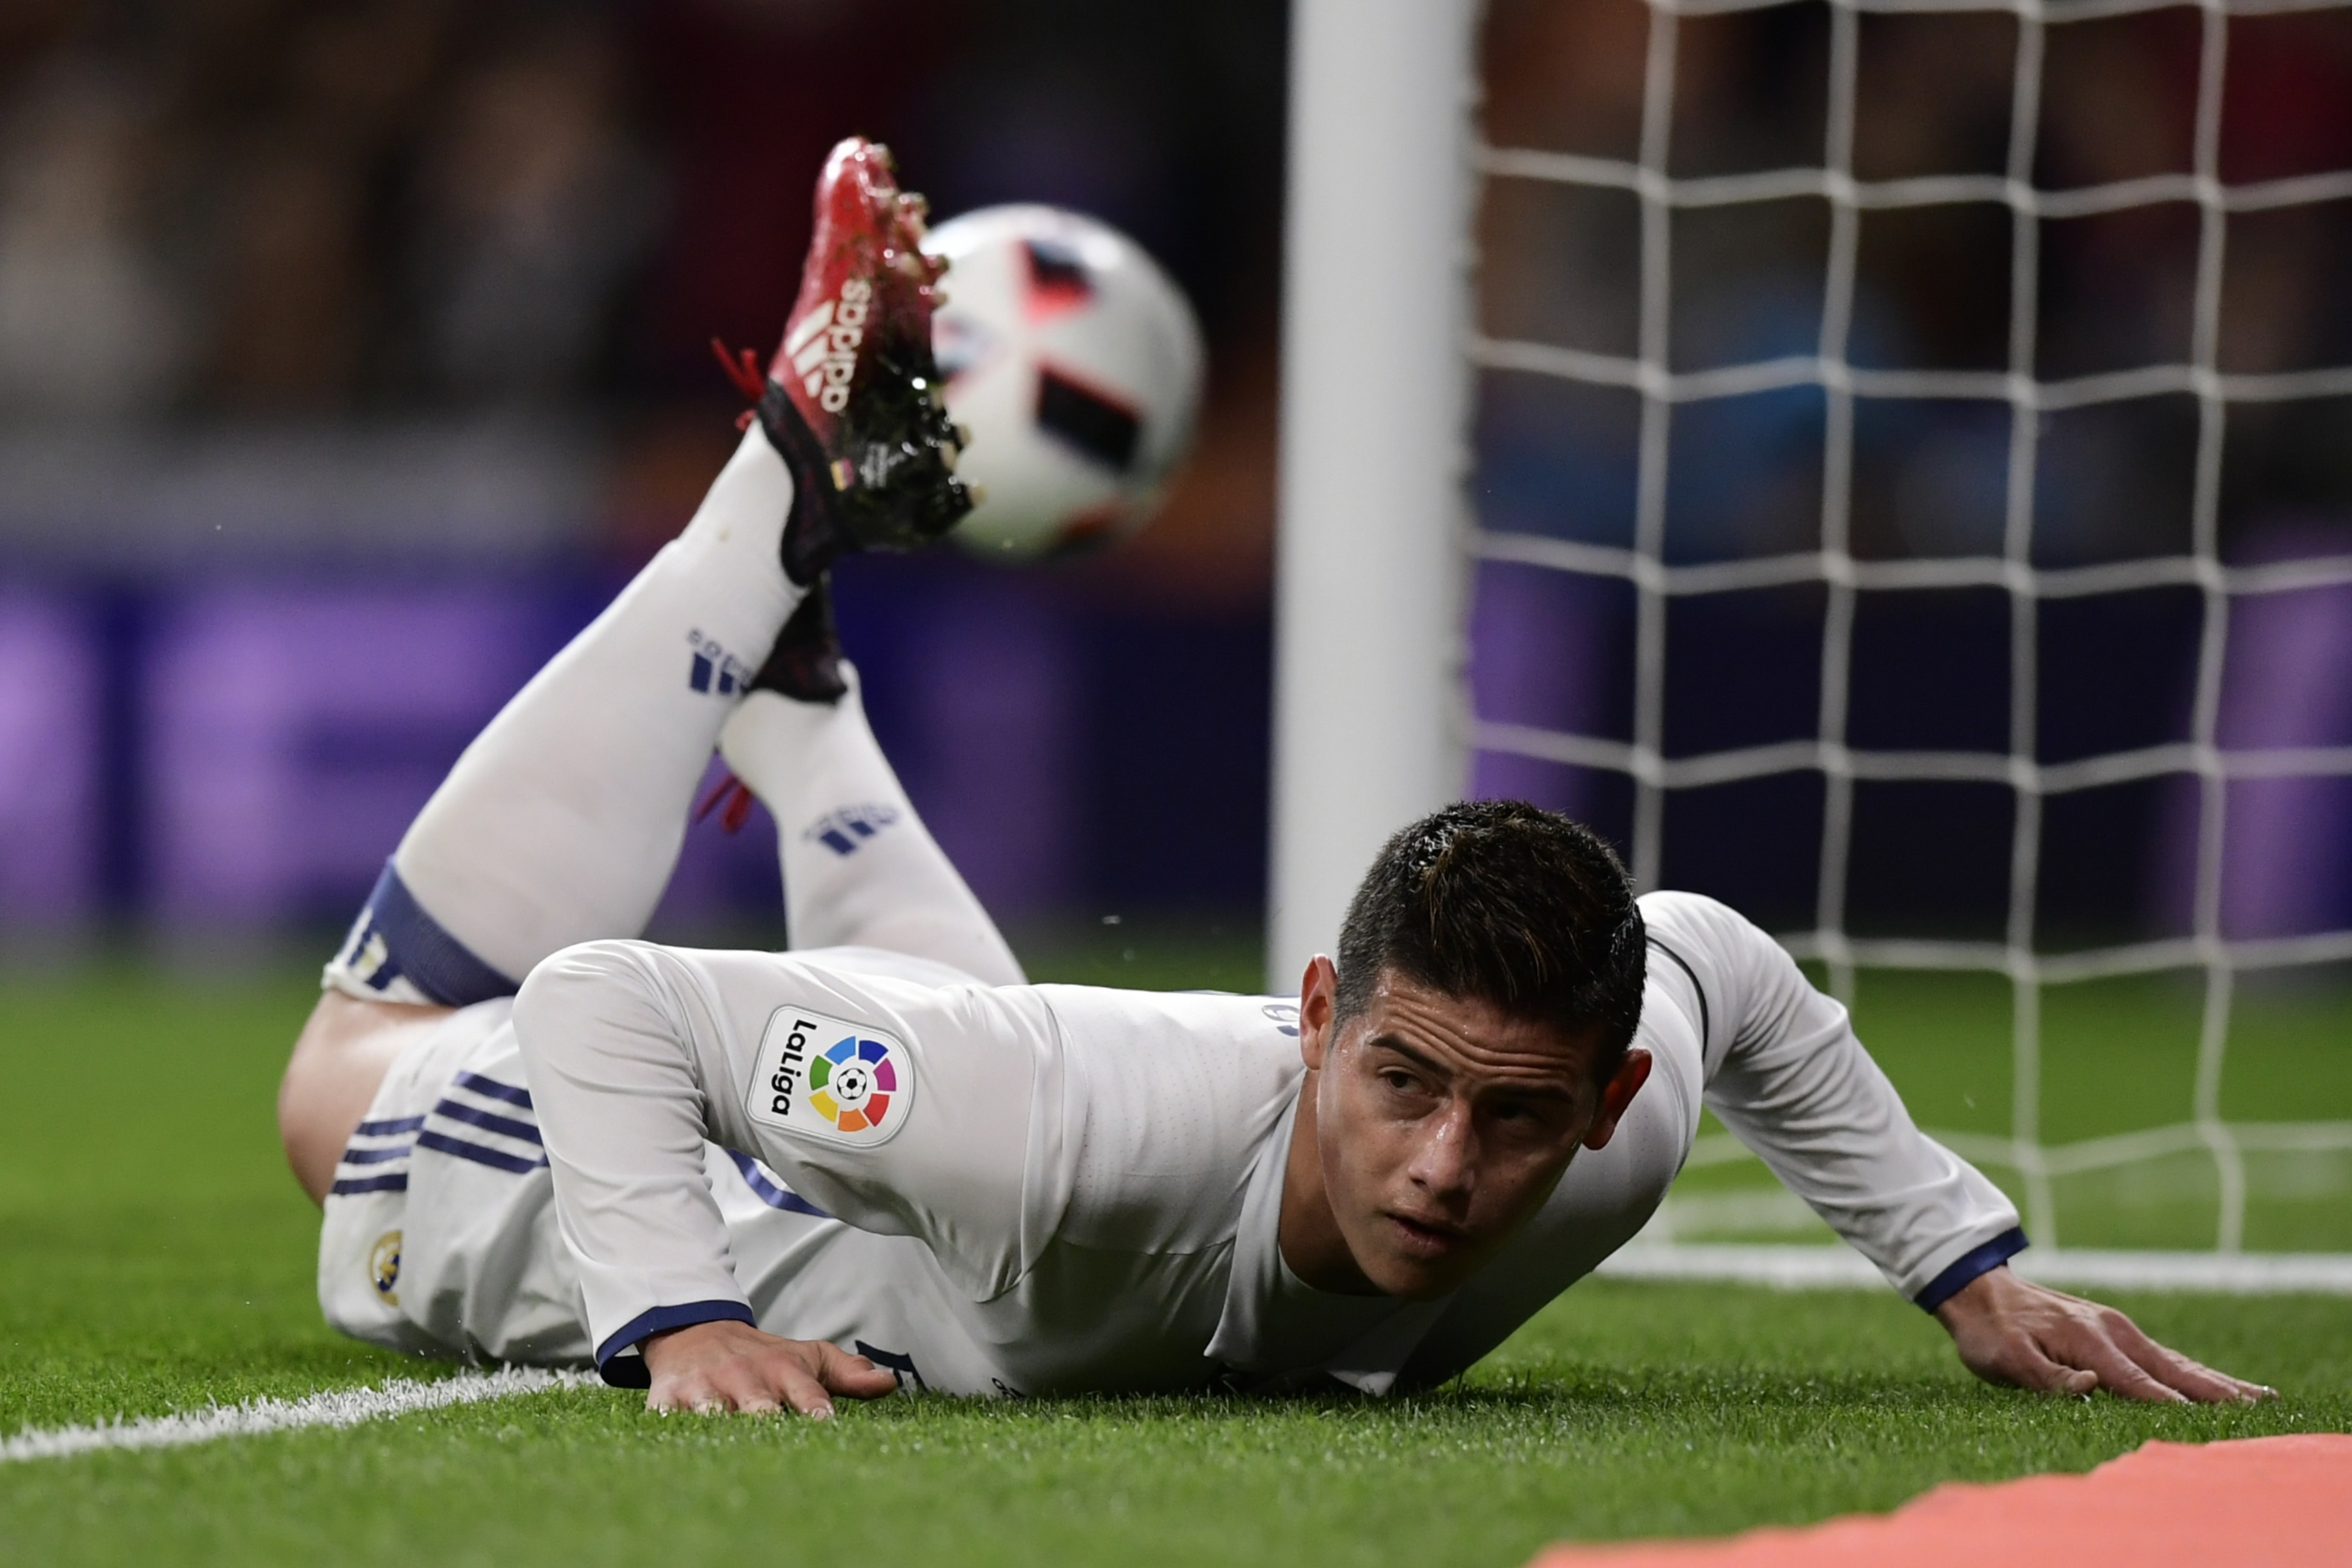 Real Madrid's Colombian midfielder James Rodriguez lies on the ground as he celebrates after scoring during the Spanish Copa del Rey (King's Cup) Round of 32 second leg football match Real Madrid CF vs Cultural y Deportiva Leonesa at the Santiago Bernabeu stadium in Madrid on November 30, 2016. (Photo by Javier Soriano/AFP/Getty Images)